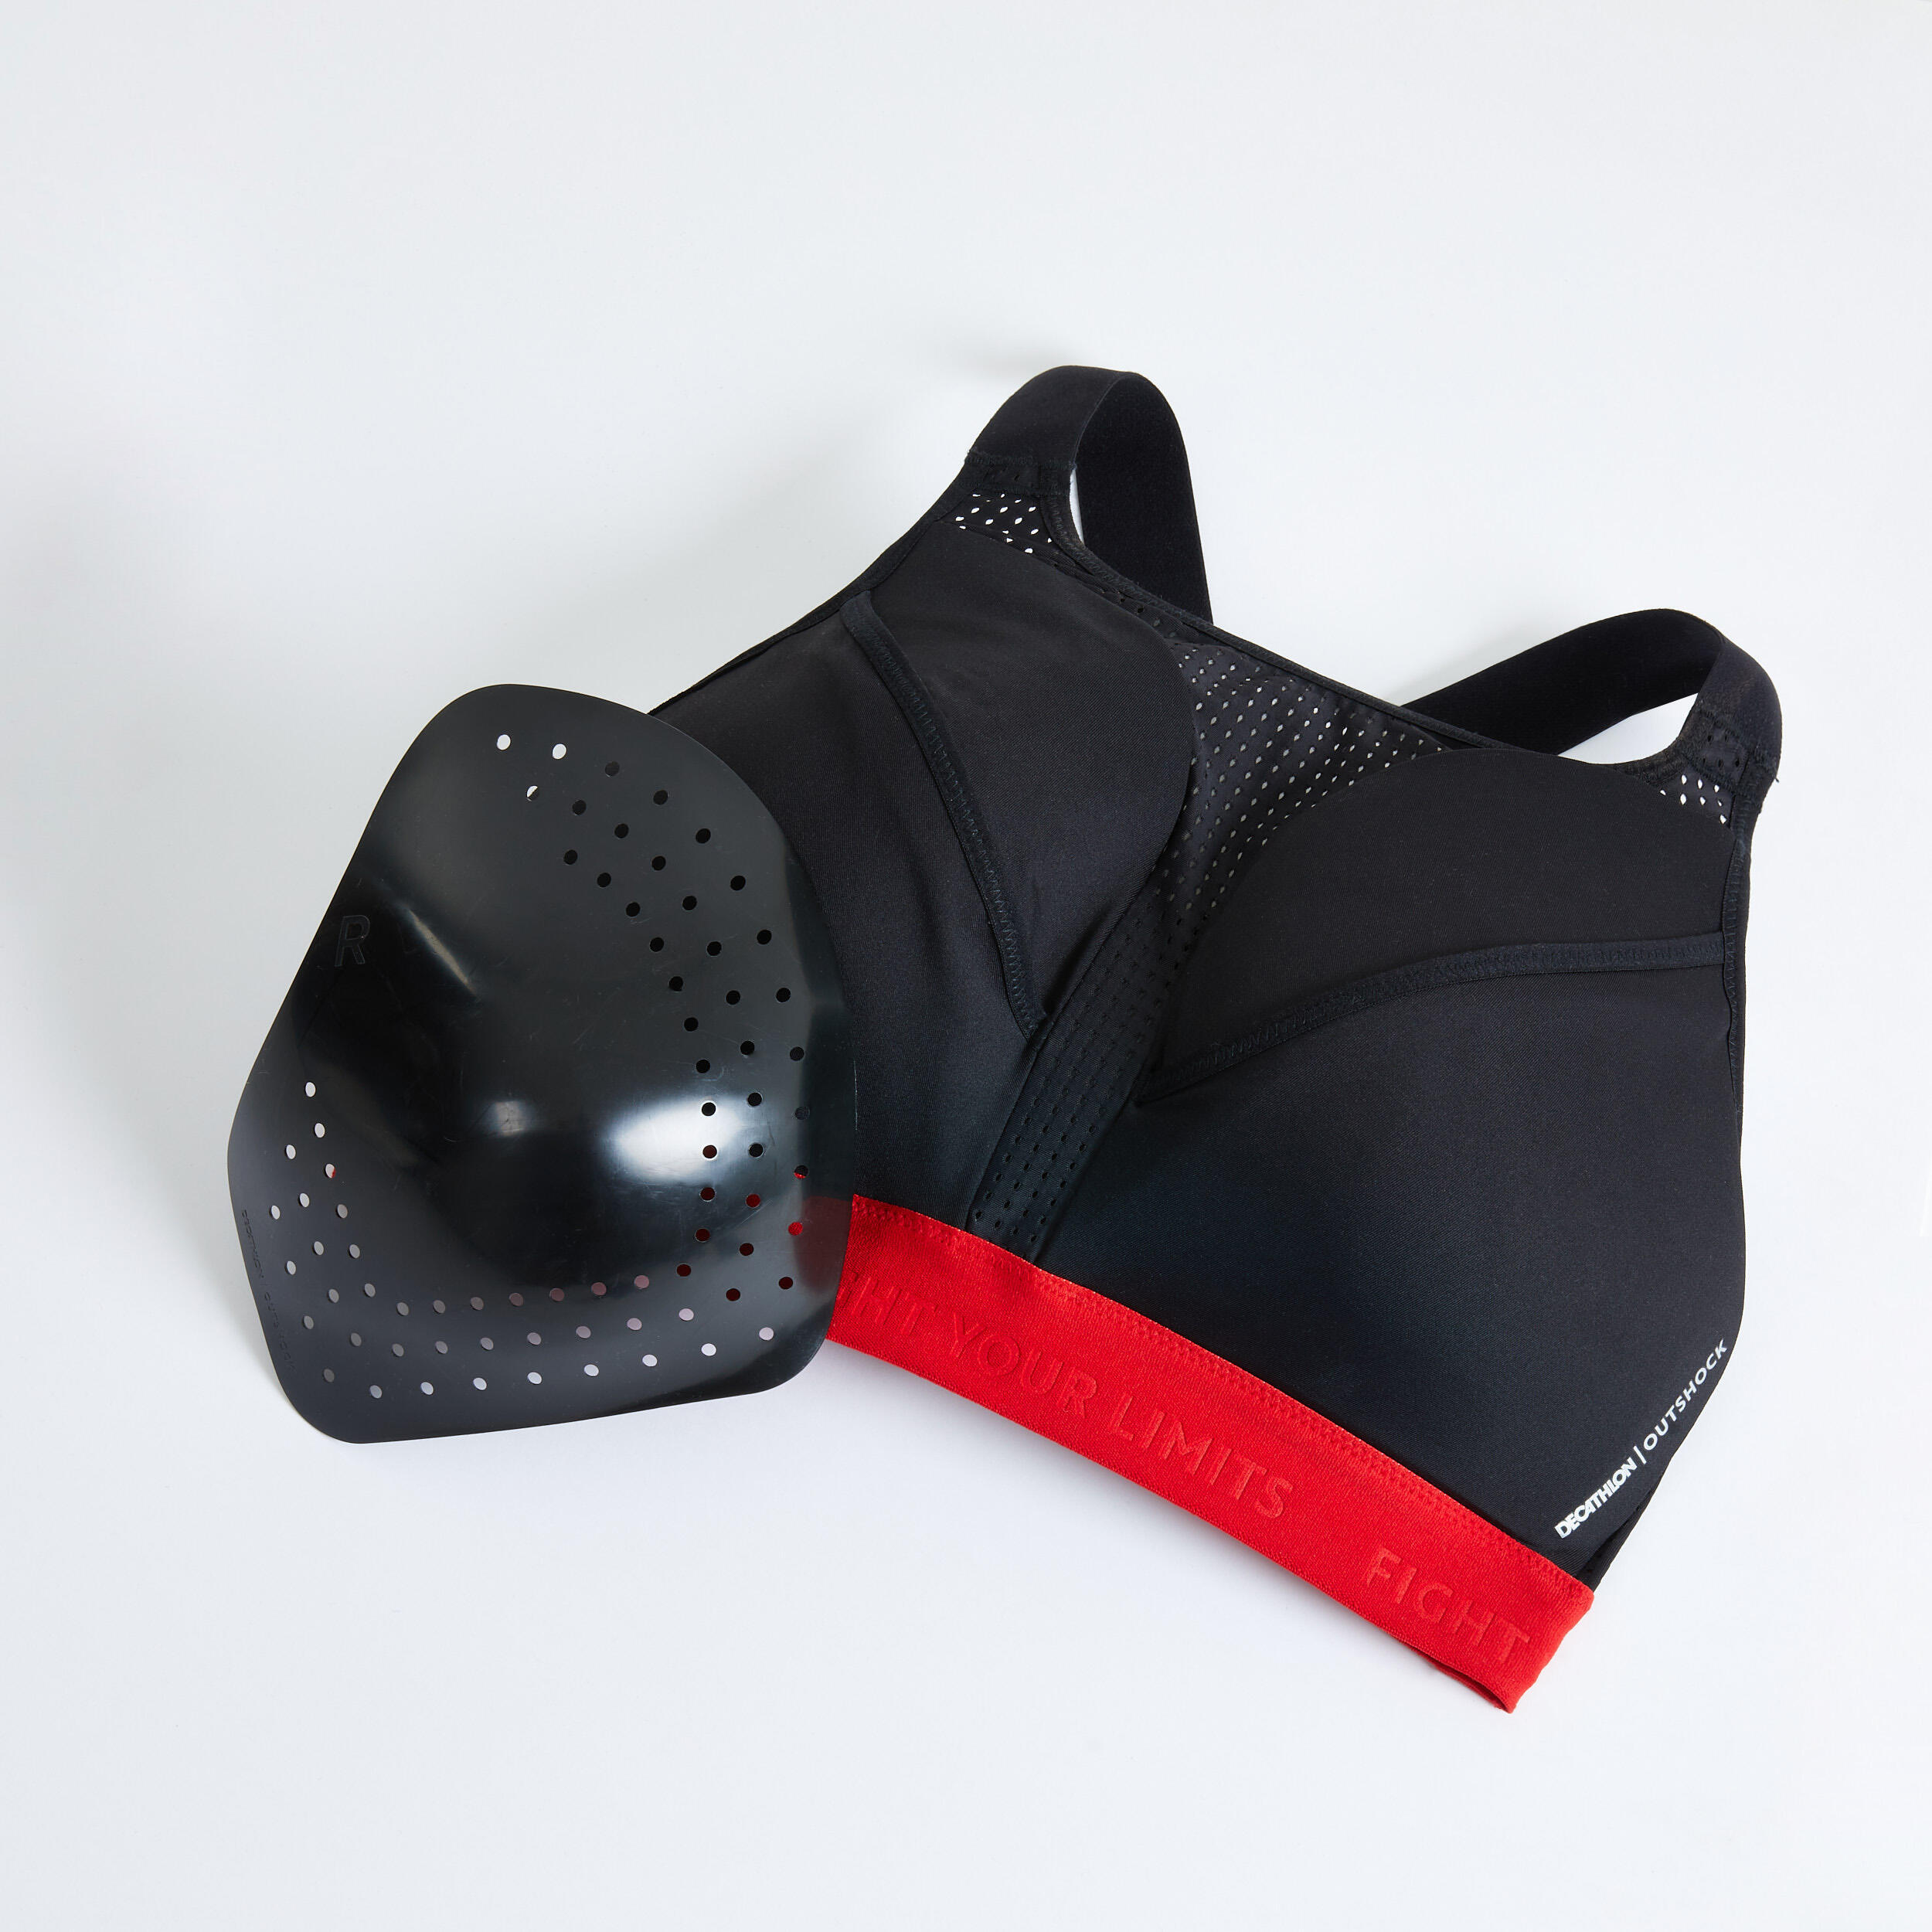 Boxing 2-In-1 Sports Bra: Support and Protection OUTSHOCK